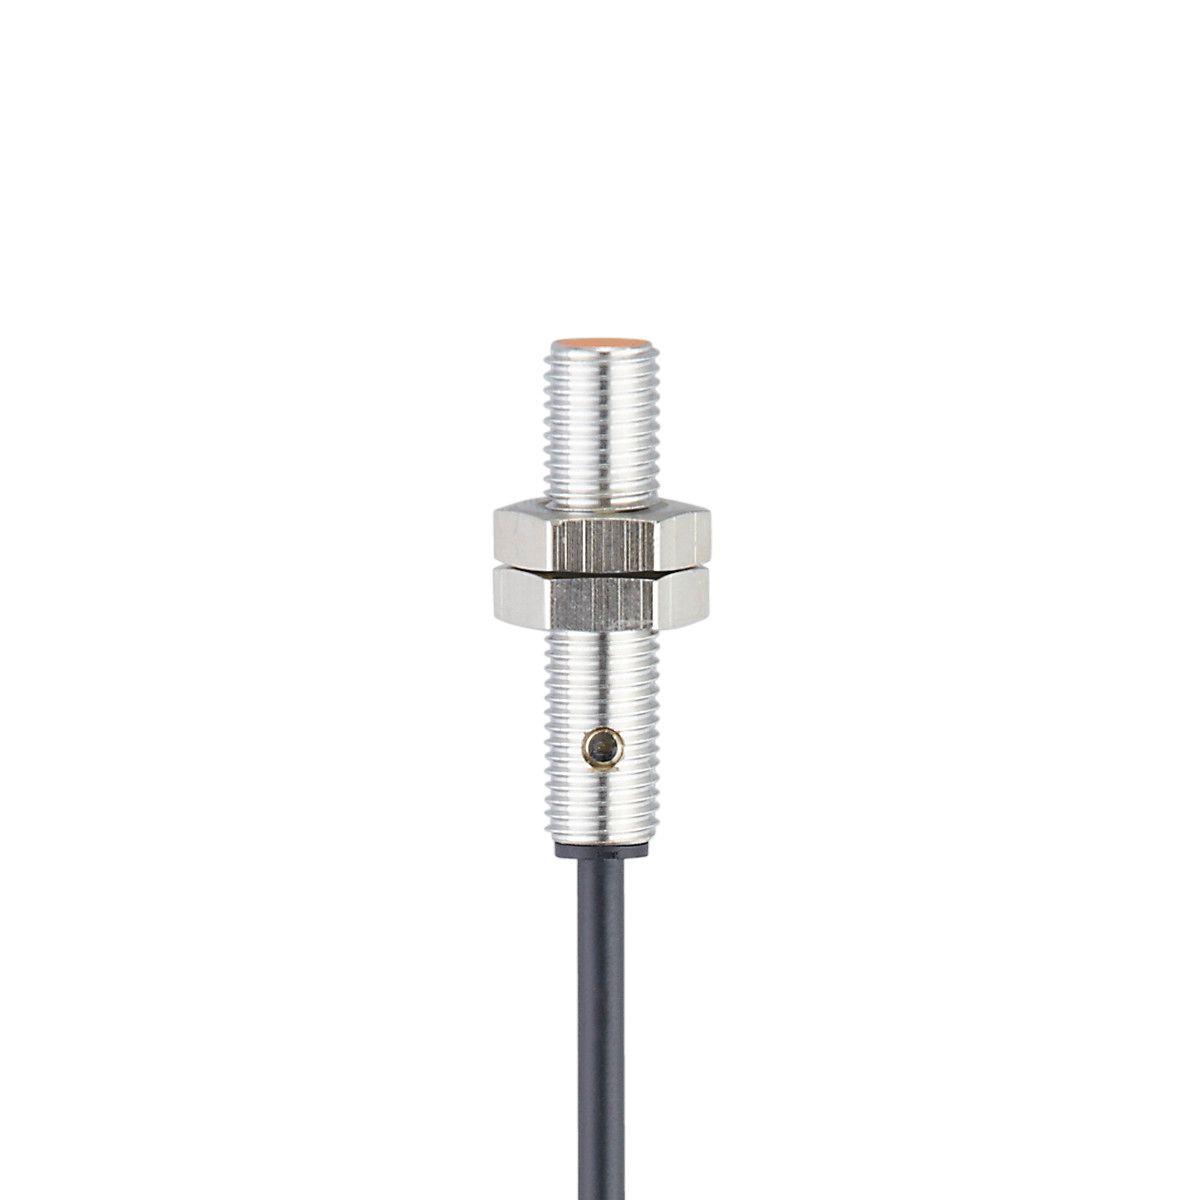 ifm Electronic IE5082 Inductive sensor, Particularly short housing, Electrical design: NPN, Output function: normally open, Sensing range [mm]: 1, Housing: Threaded type, Dimensions [mm]: M8 x 1 / L = 35